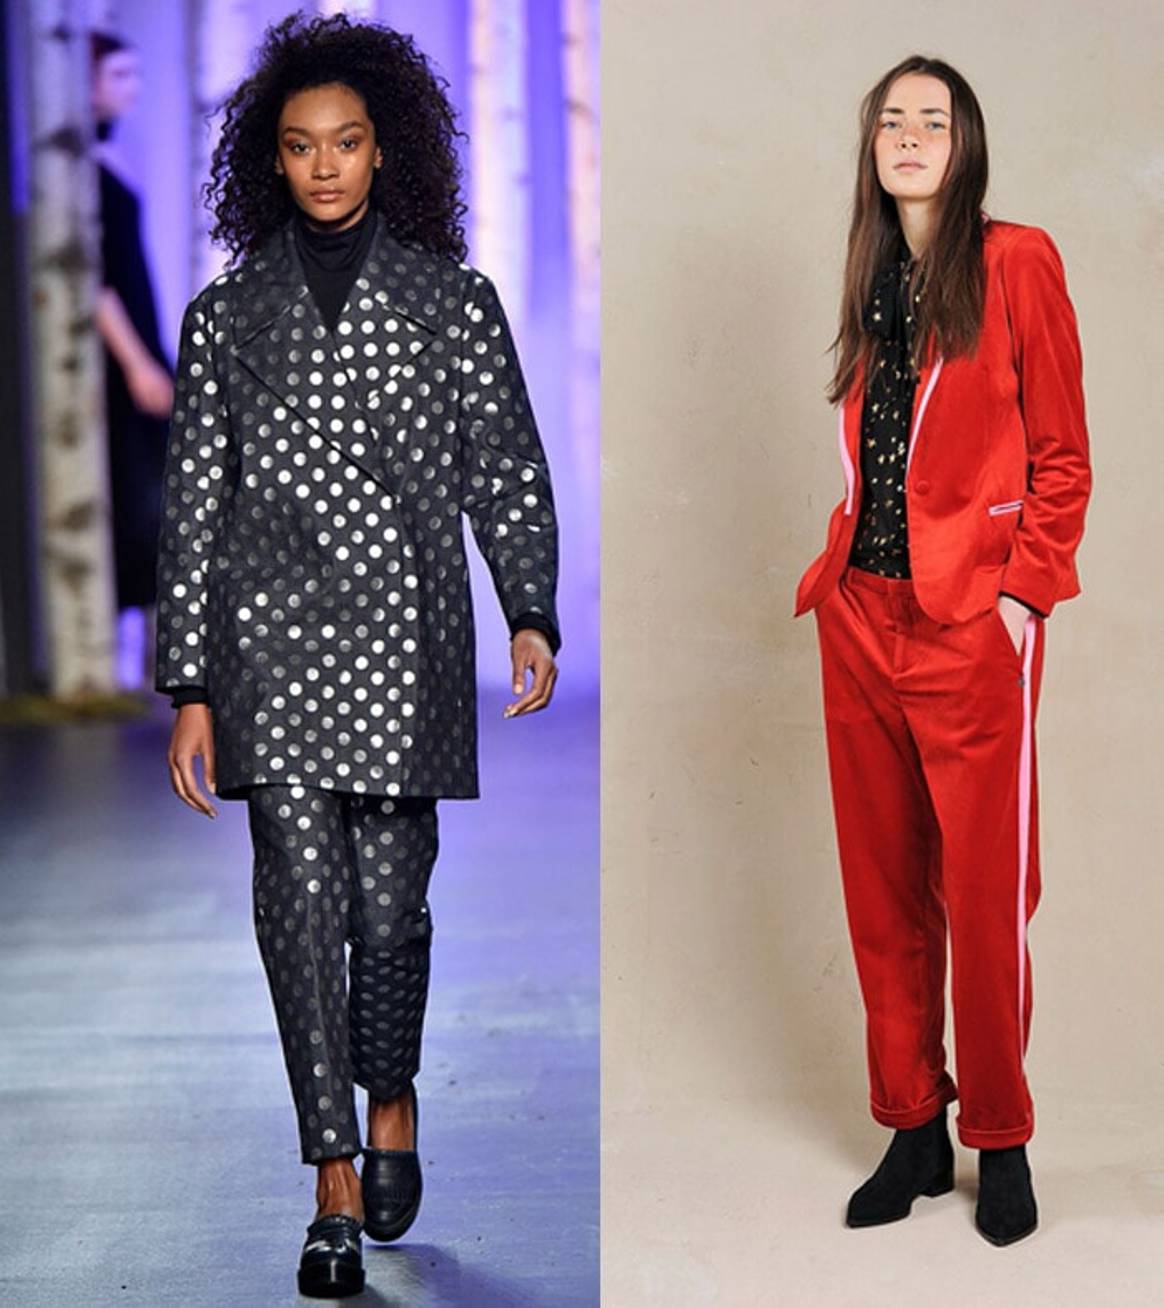 Designers elevating their offerings at day four of New York Fashion Week